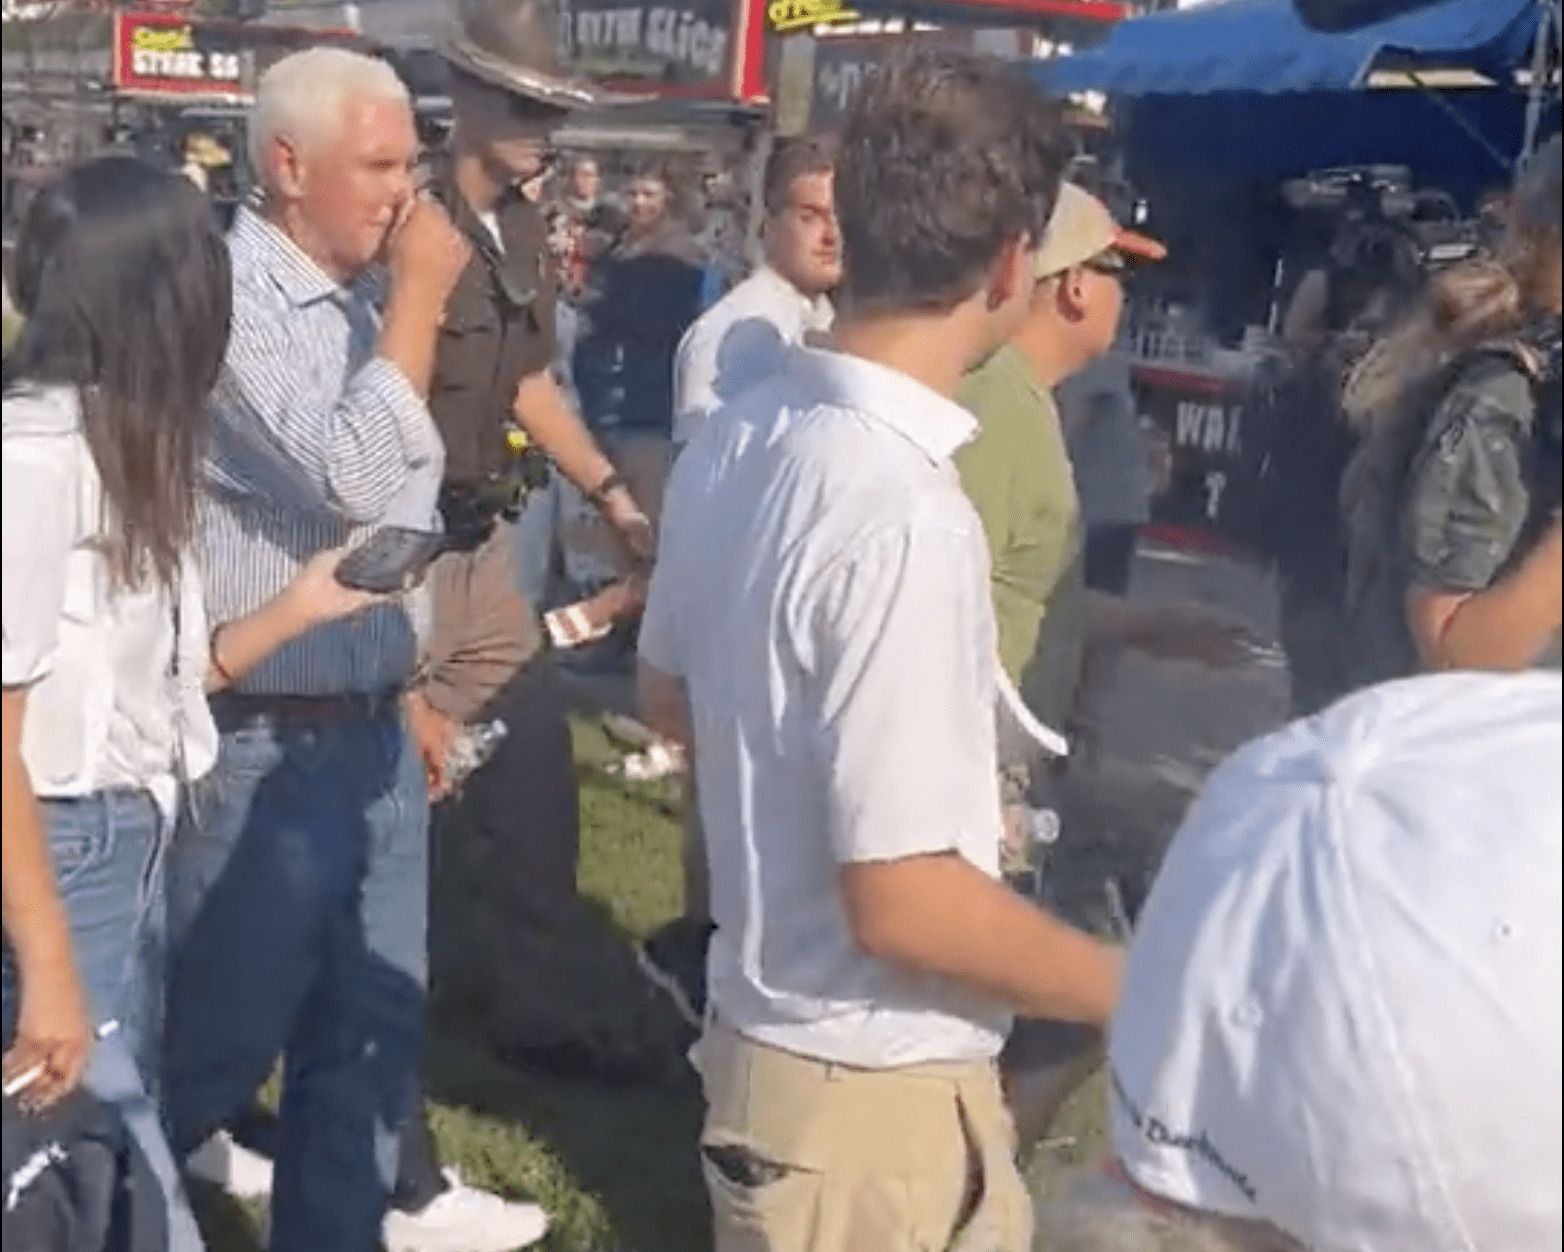 Mike Pence Heckled By Trump Supporters At Iowa State Fair | WLT Report